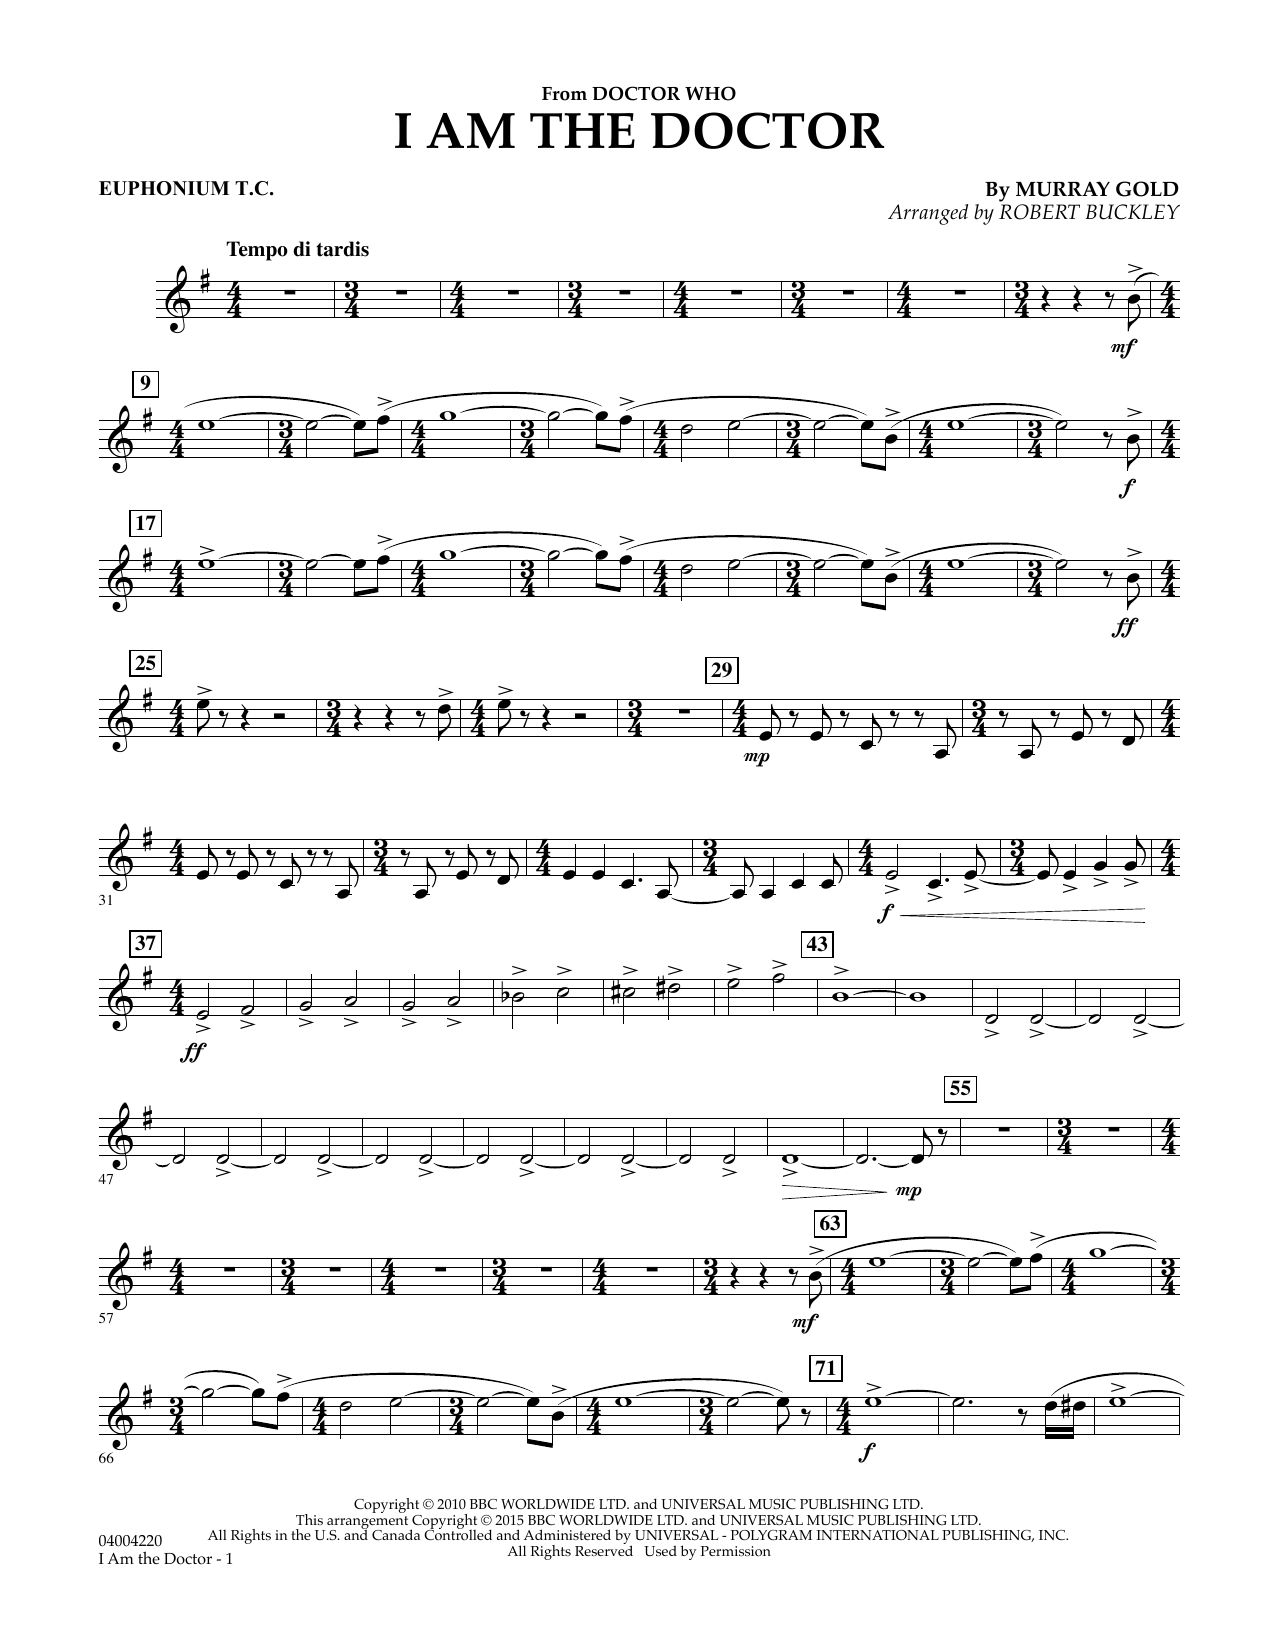 Robert Buckley I Am the Doctor (from Doctor Who) - Euphonium in Treble Clef sheet music notes and chords. Download Printable PDF.